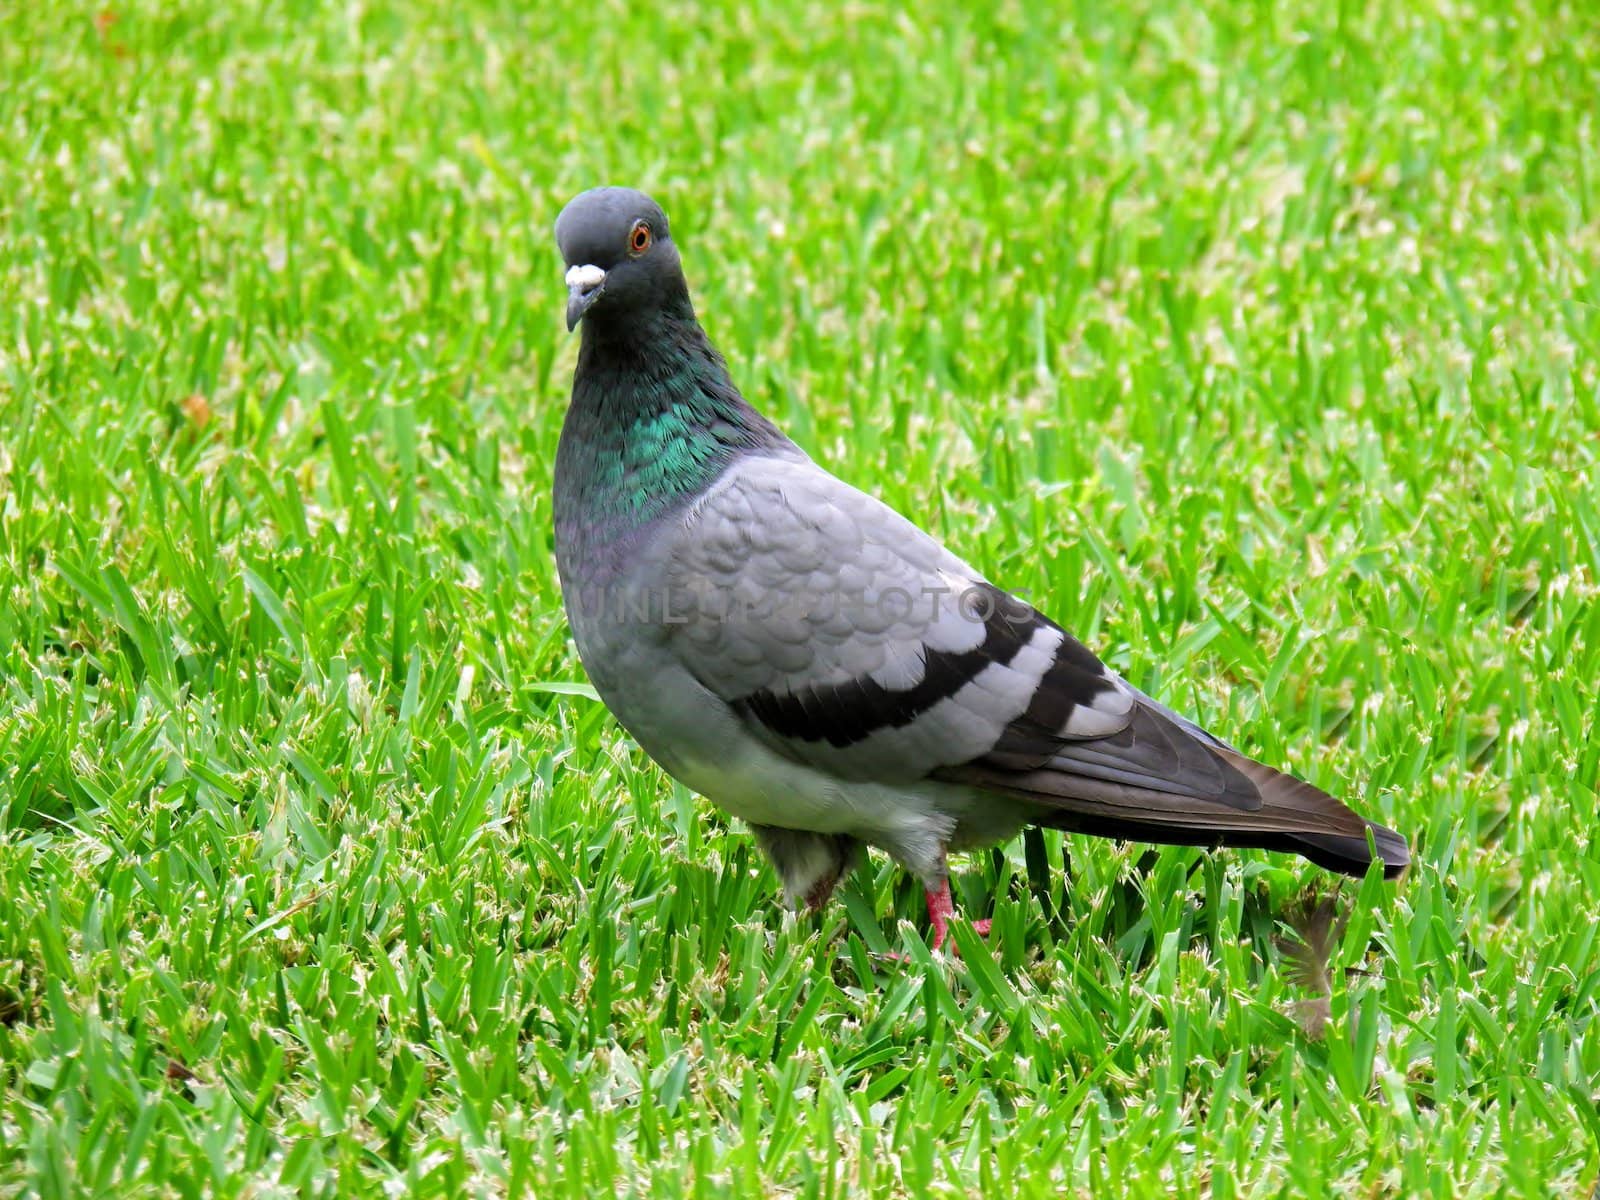 Pigeon seeking for food in green grass background by alentejano